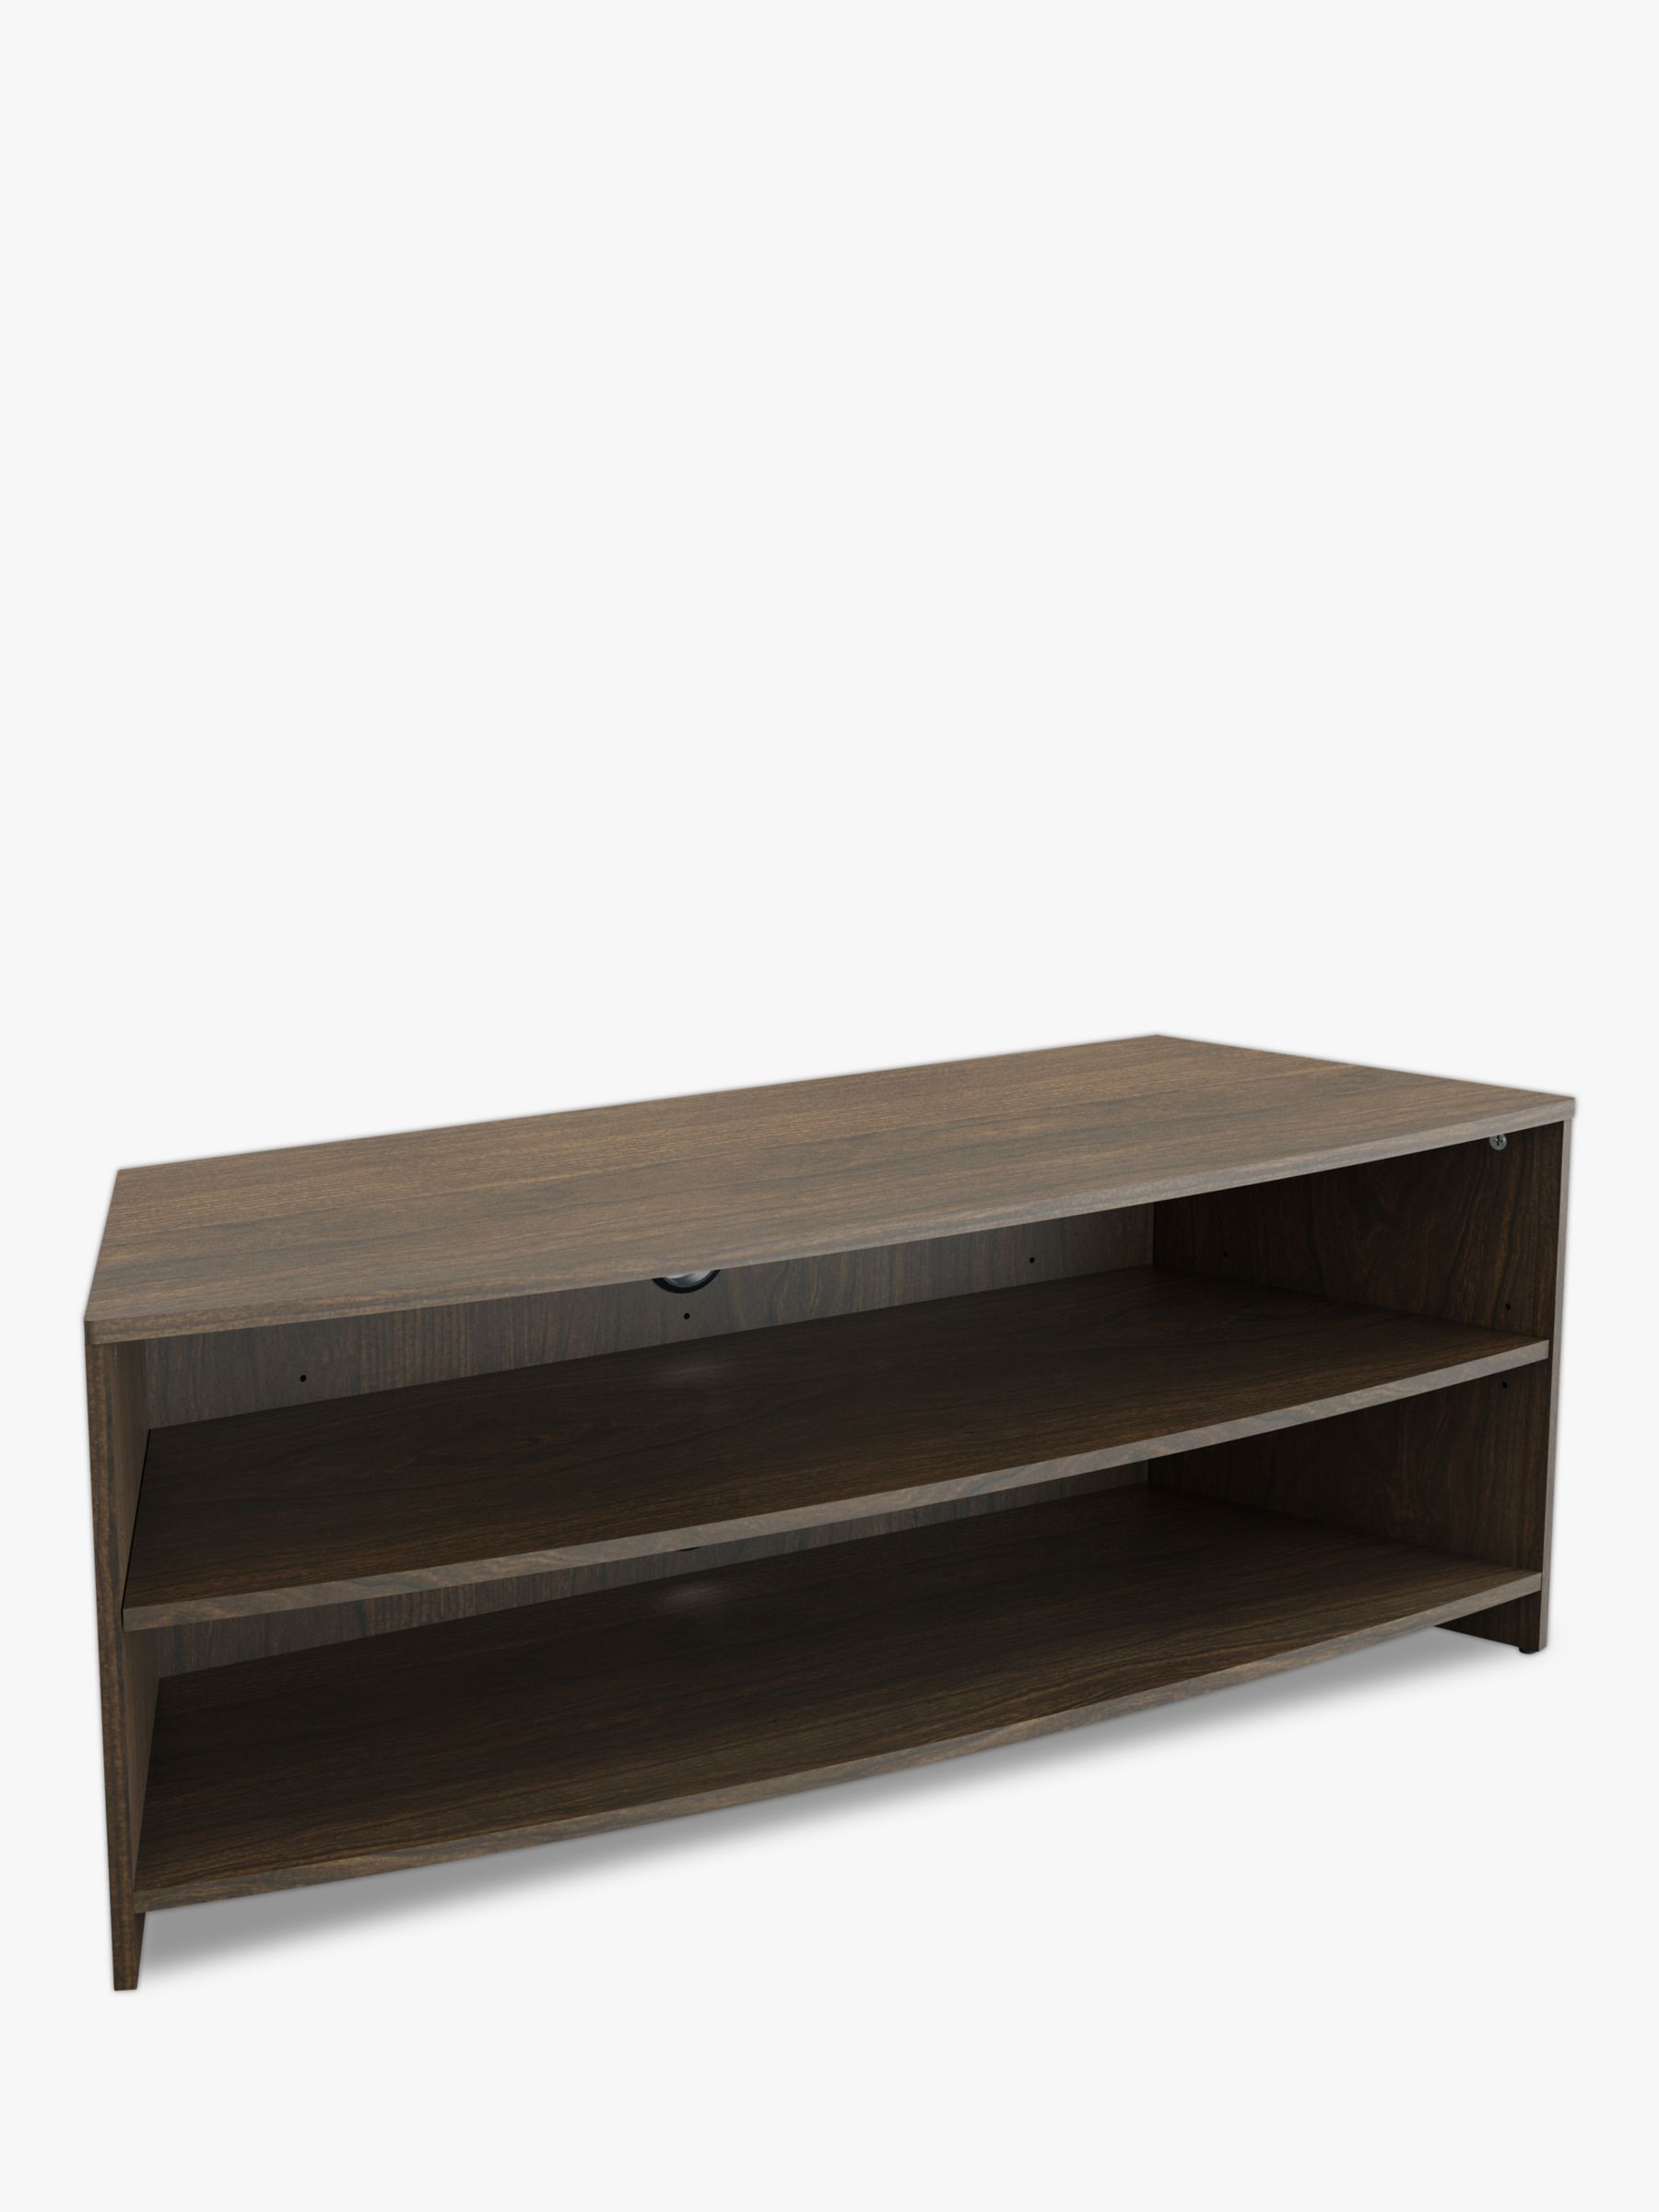 Photo of Avf dartmouth 1200 tv stand for tvs up to 60